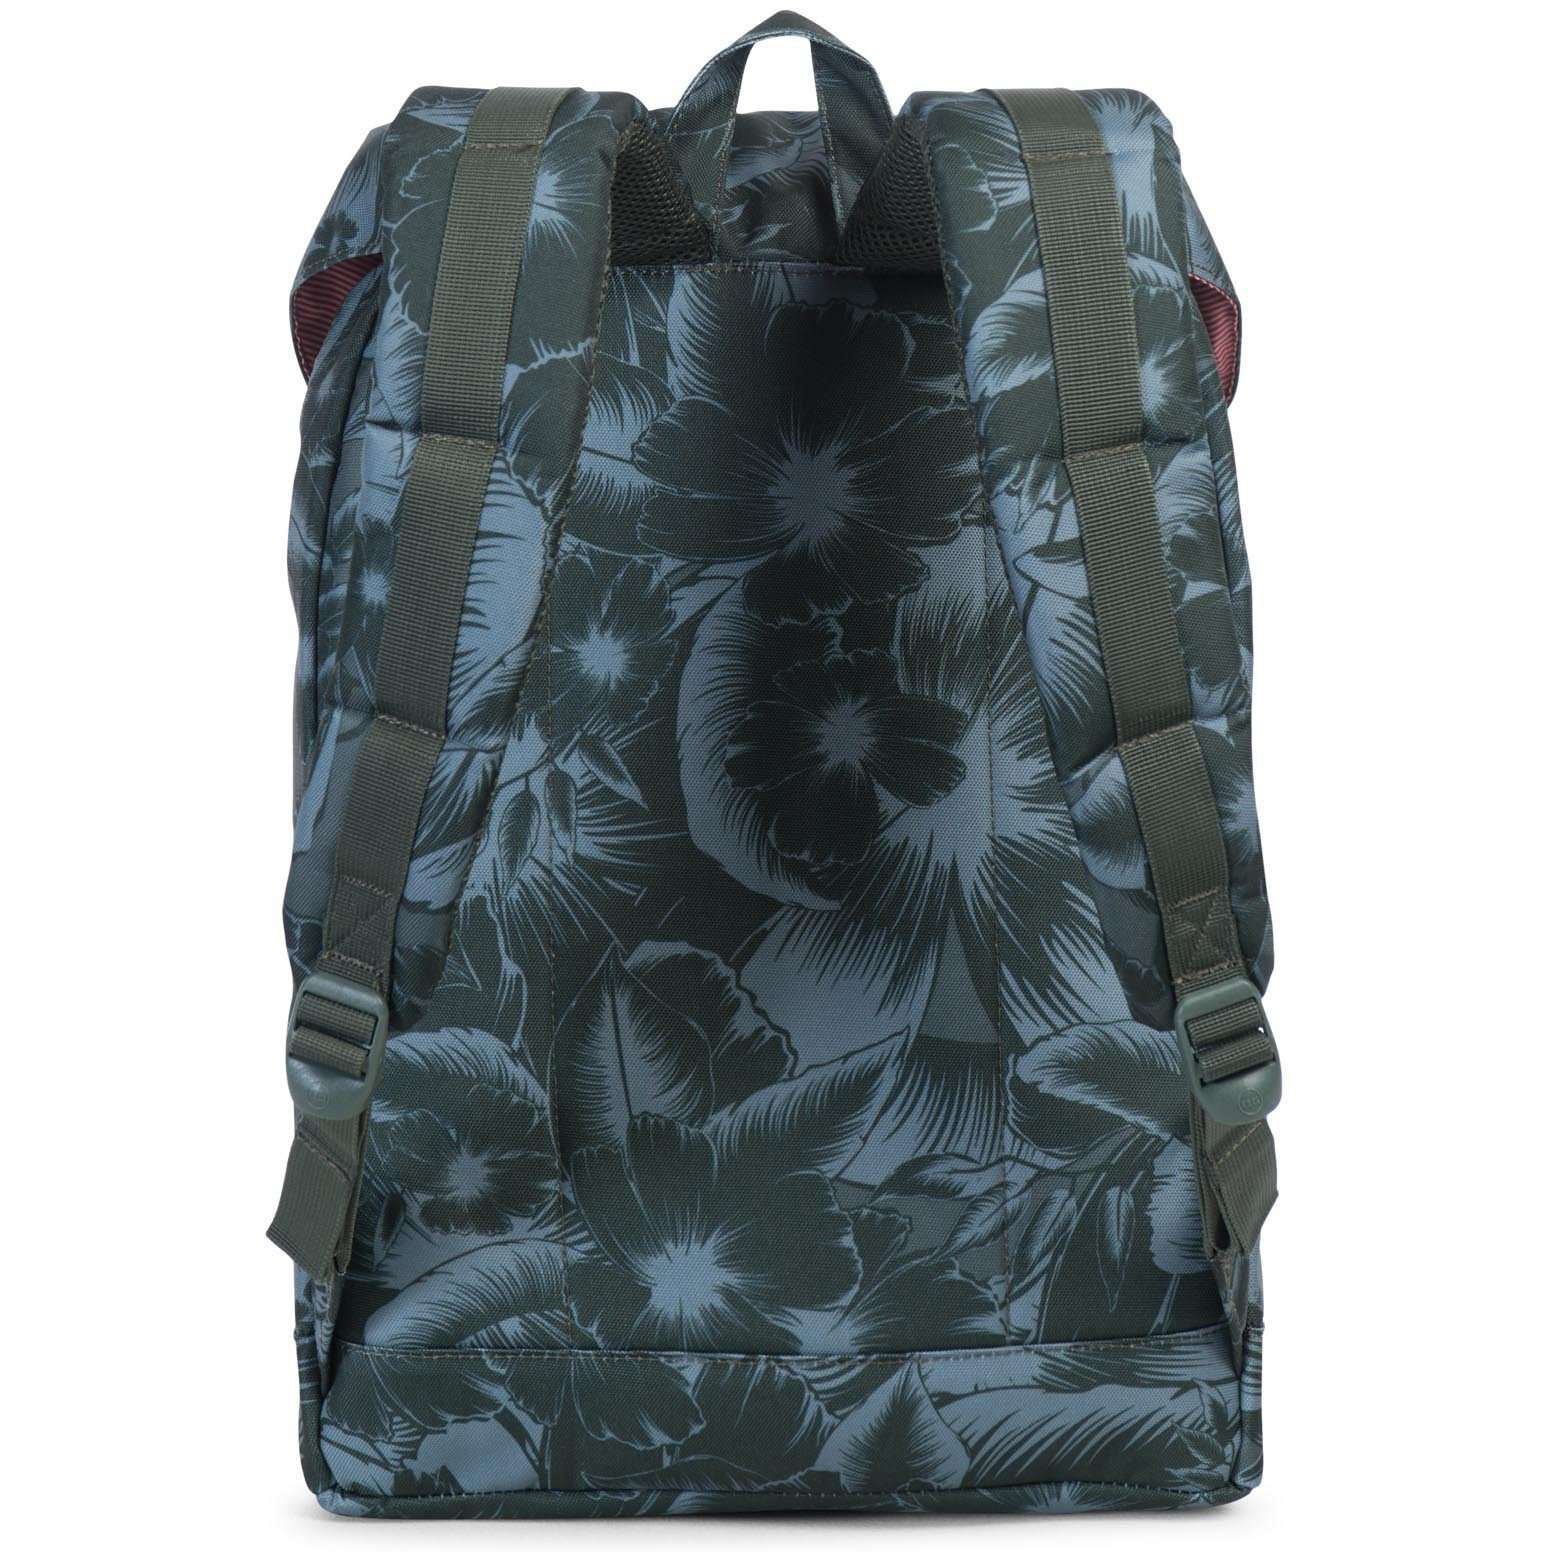 Retreat Backpack in Jungle Floral Green by Herschel Supply Co. - Country Club Prep